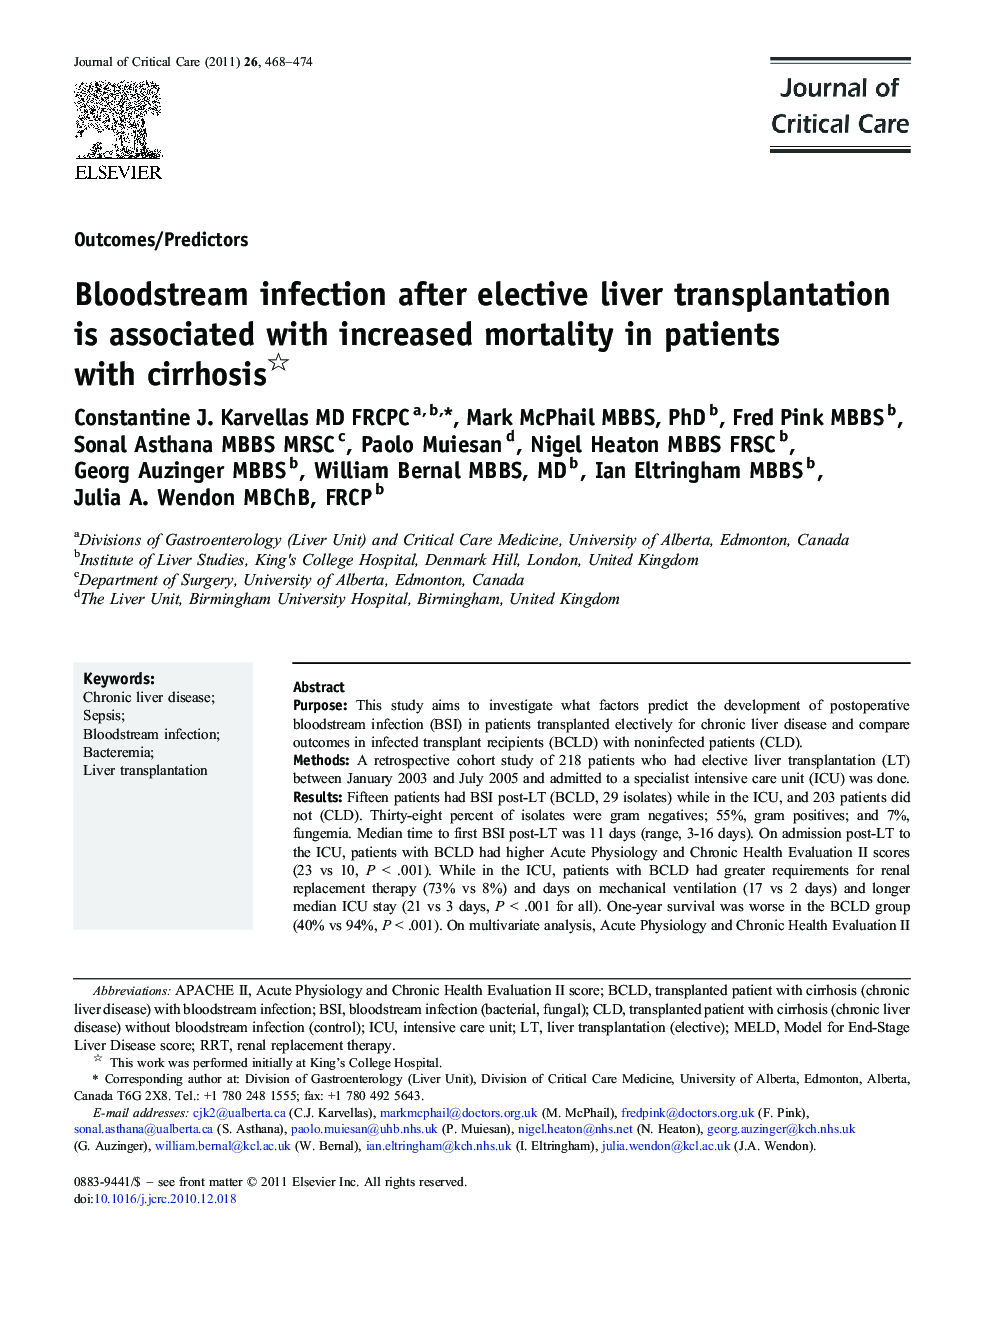 Bloodstream infection after elective liver transplantation is associated with increased mortality in patients with cirrhosis 